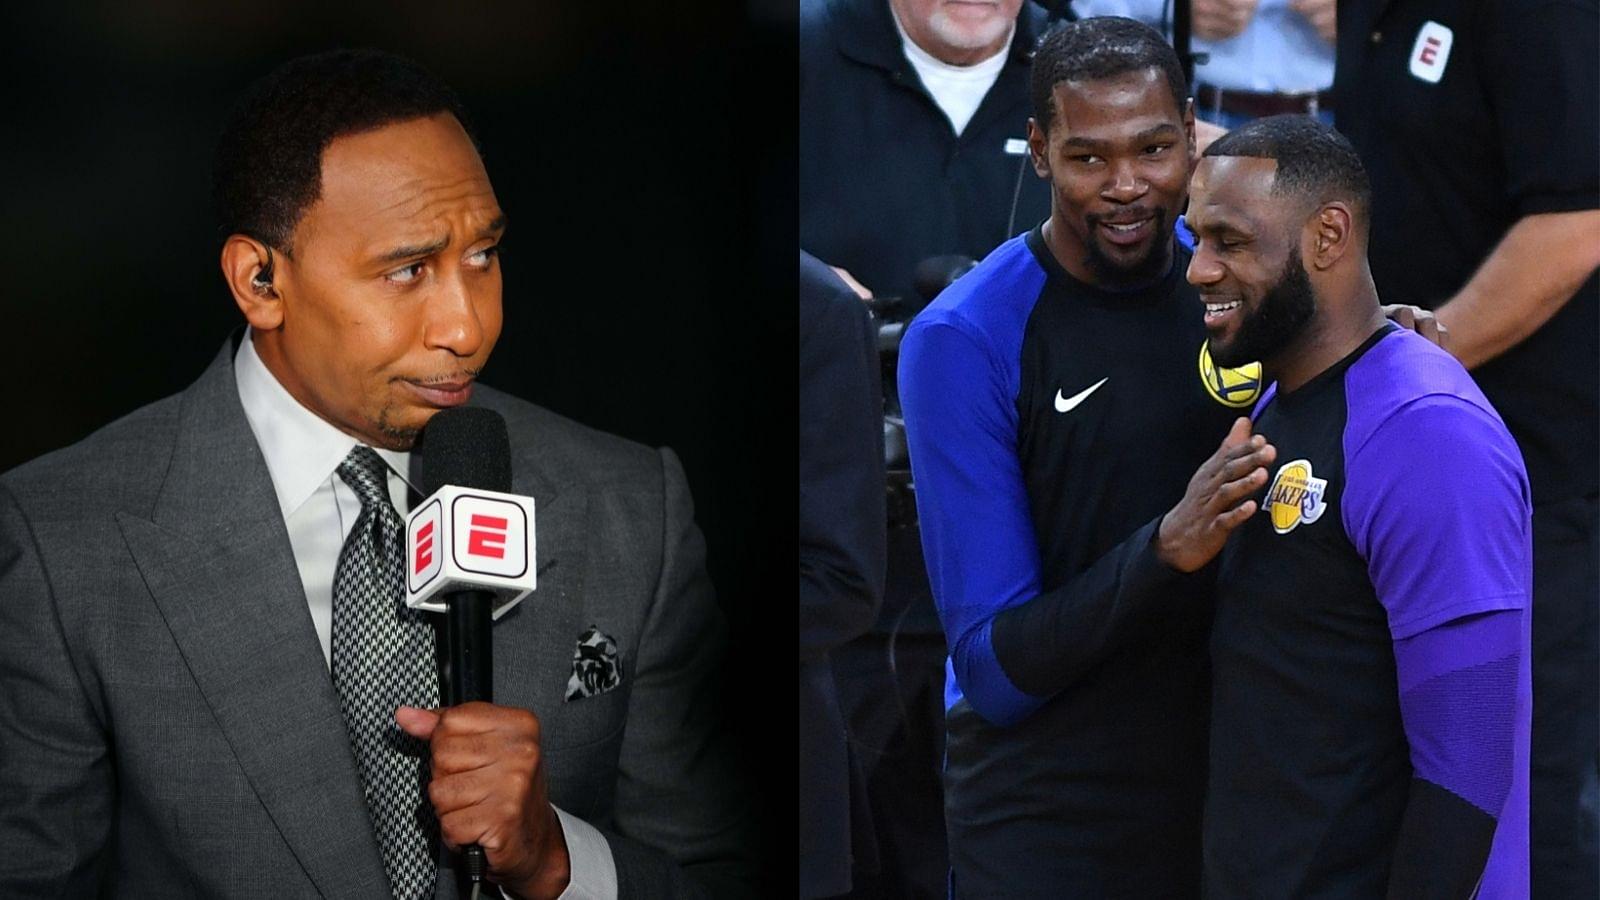 "You can not put more pressure on Kevin Durant, LeBron James, or Chris Paul than themselves": Stephen A Smith gets owned by JJ Redick for questioning the legacies of the greats